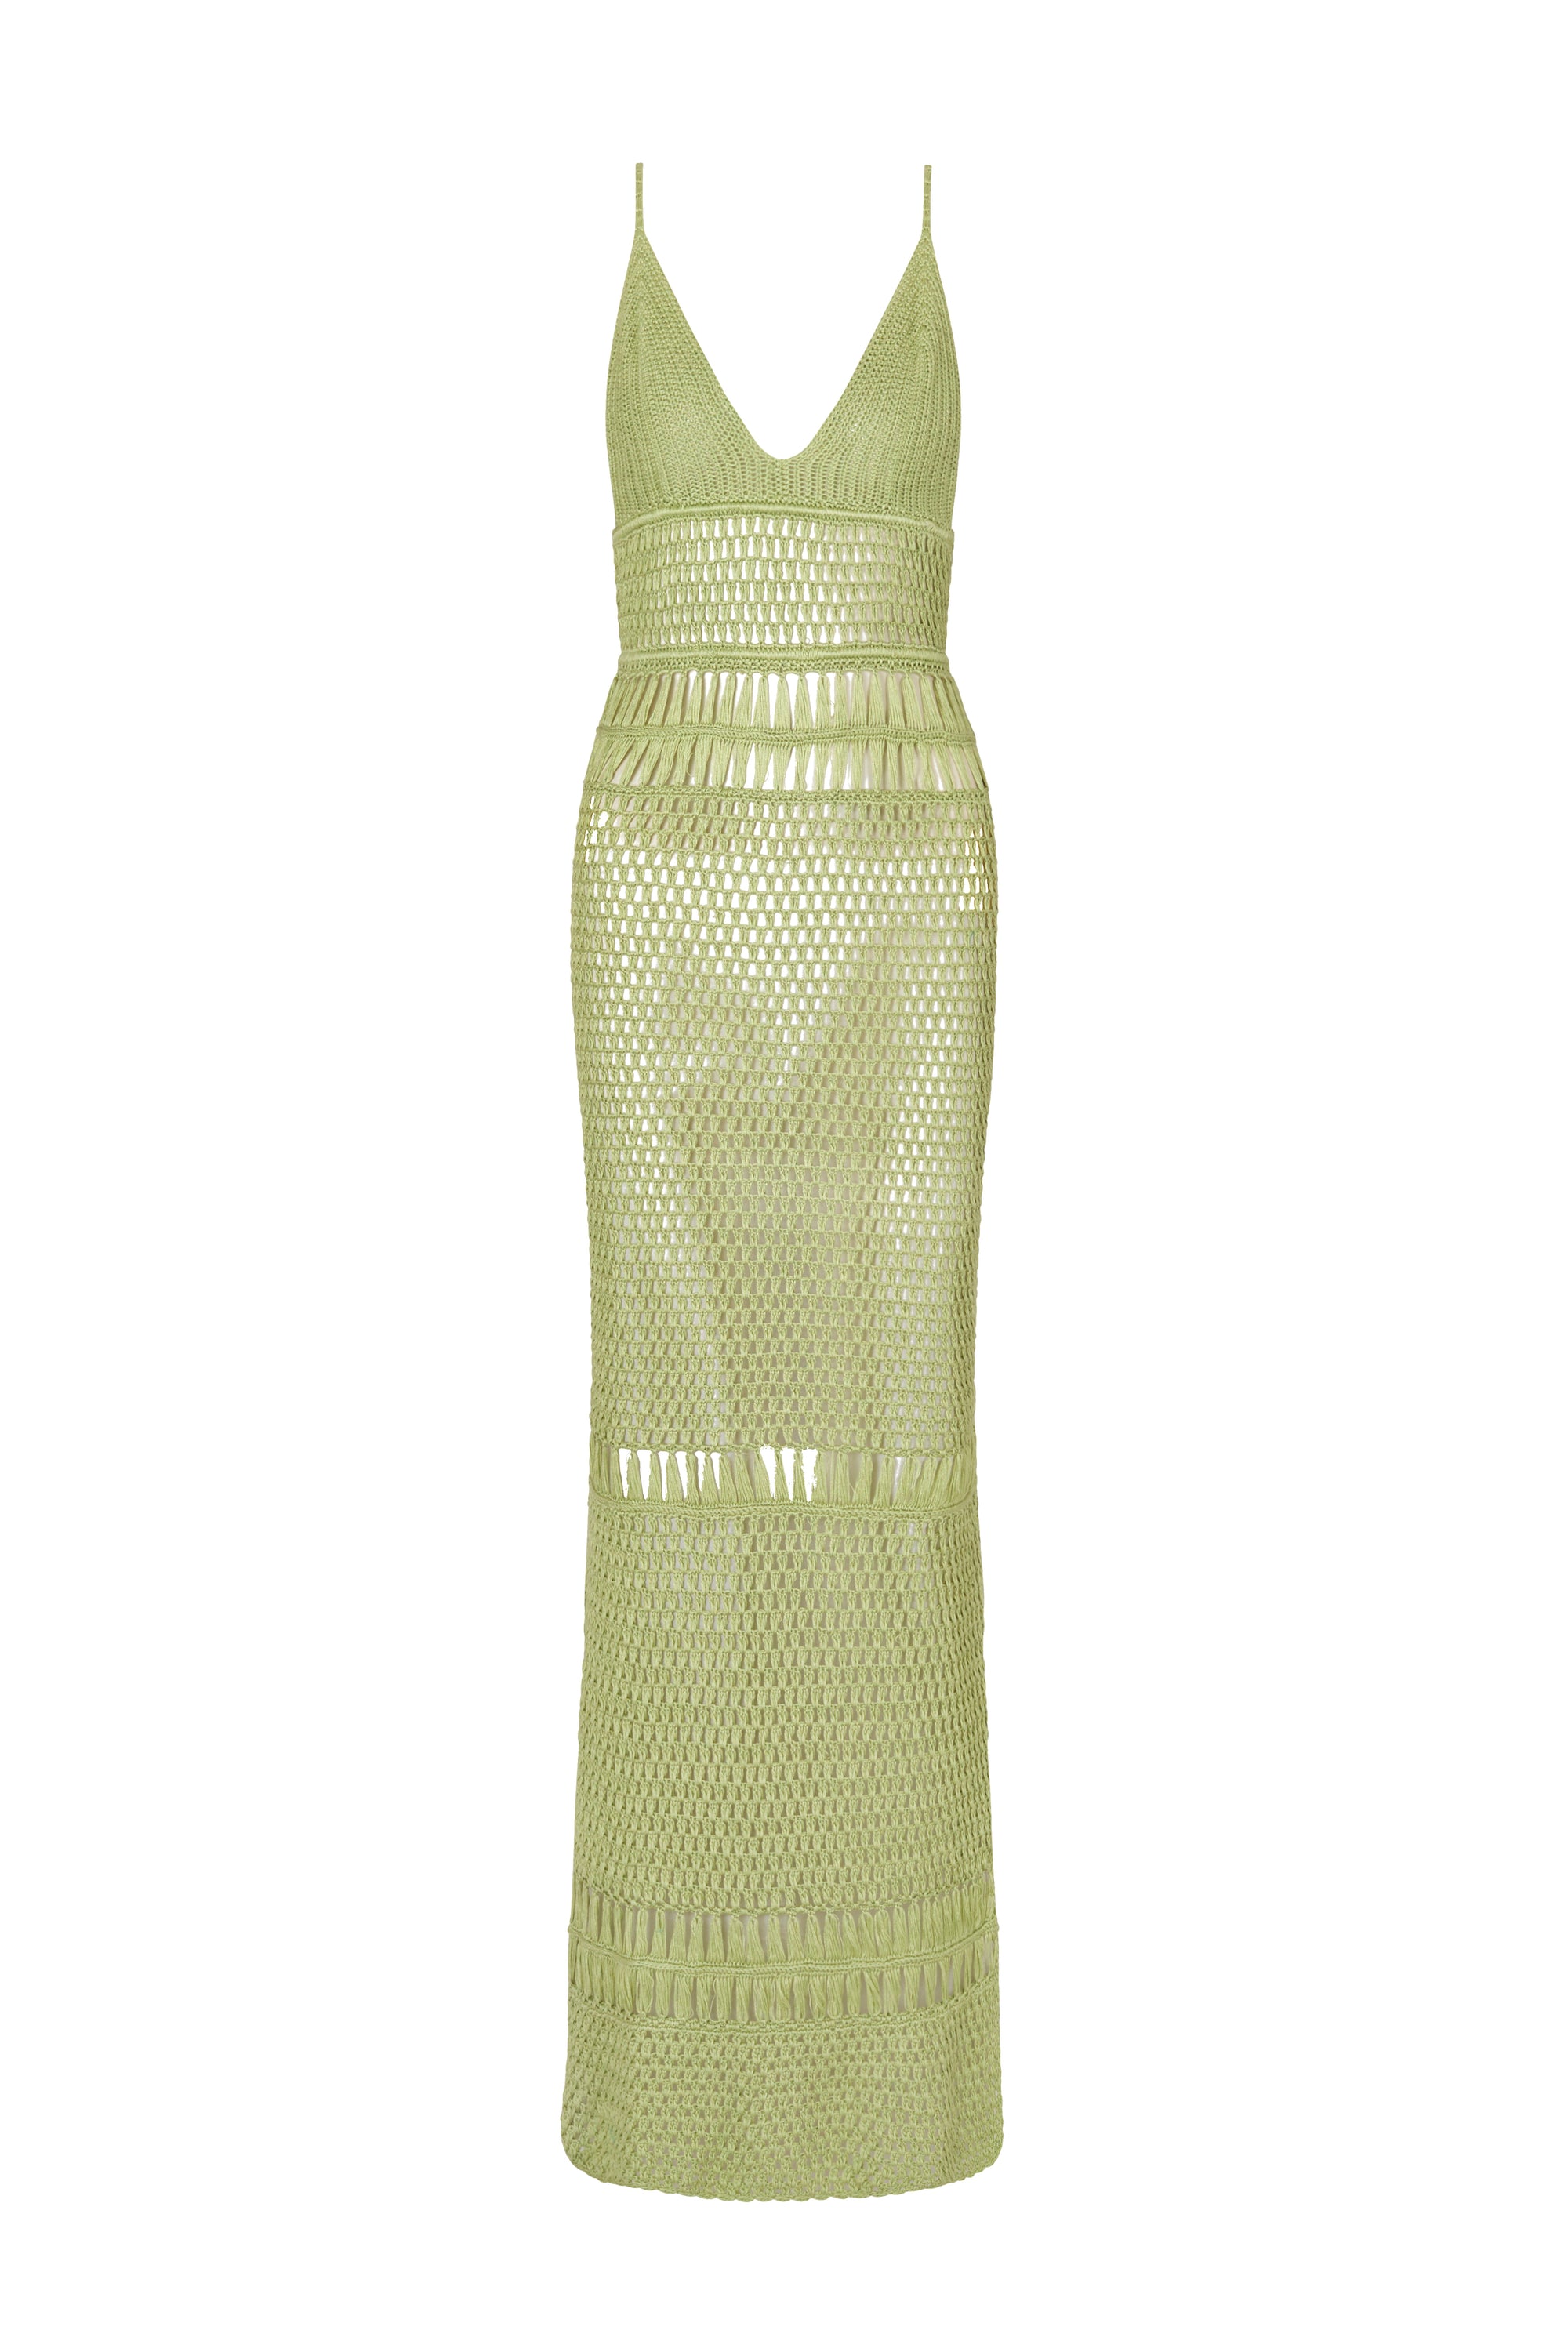 flook the label luana maxi dress lime crochet product image front